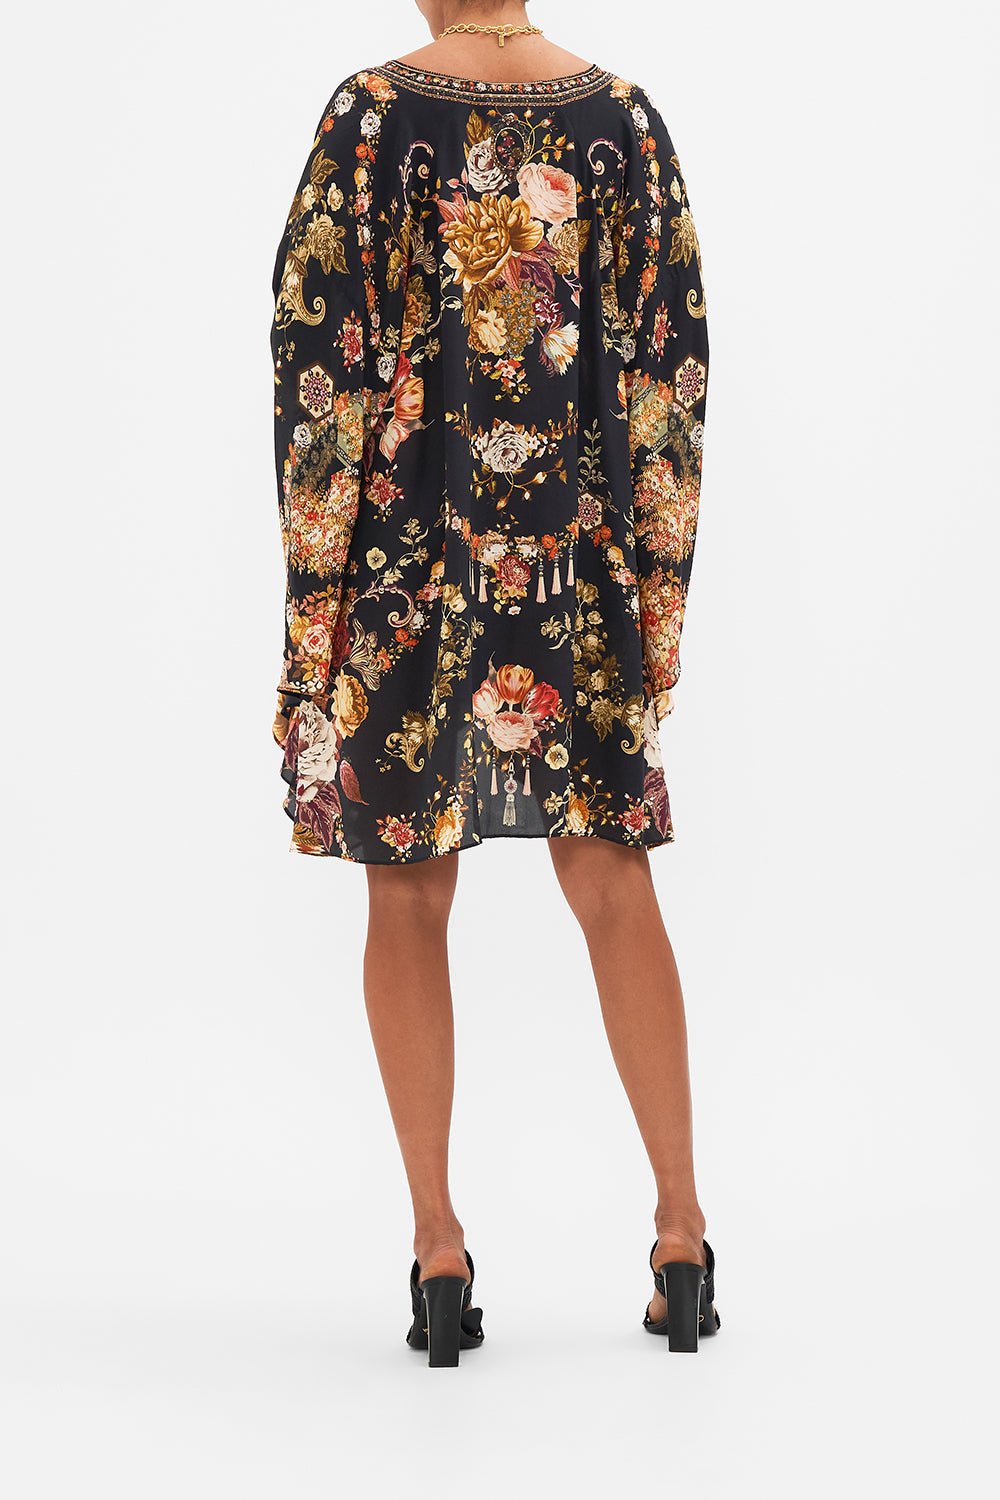 CAMILLA floral Raglan Sleeve Flared Kaftan in Stitched in Time